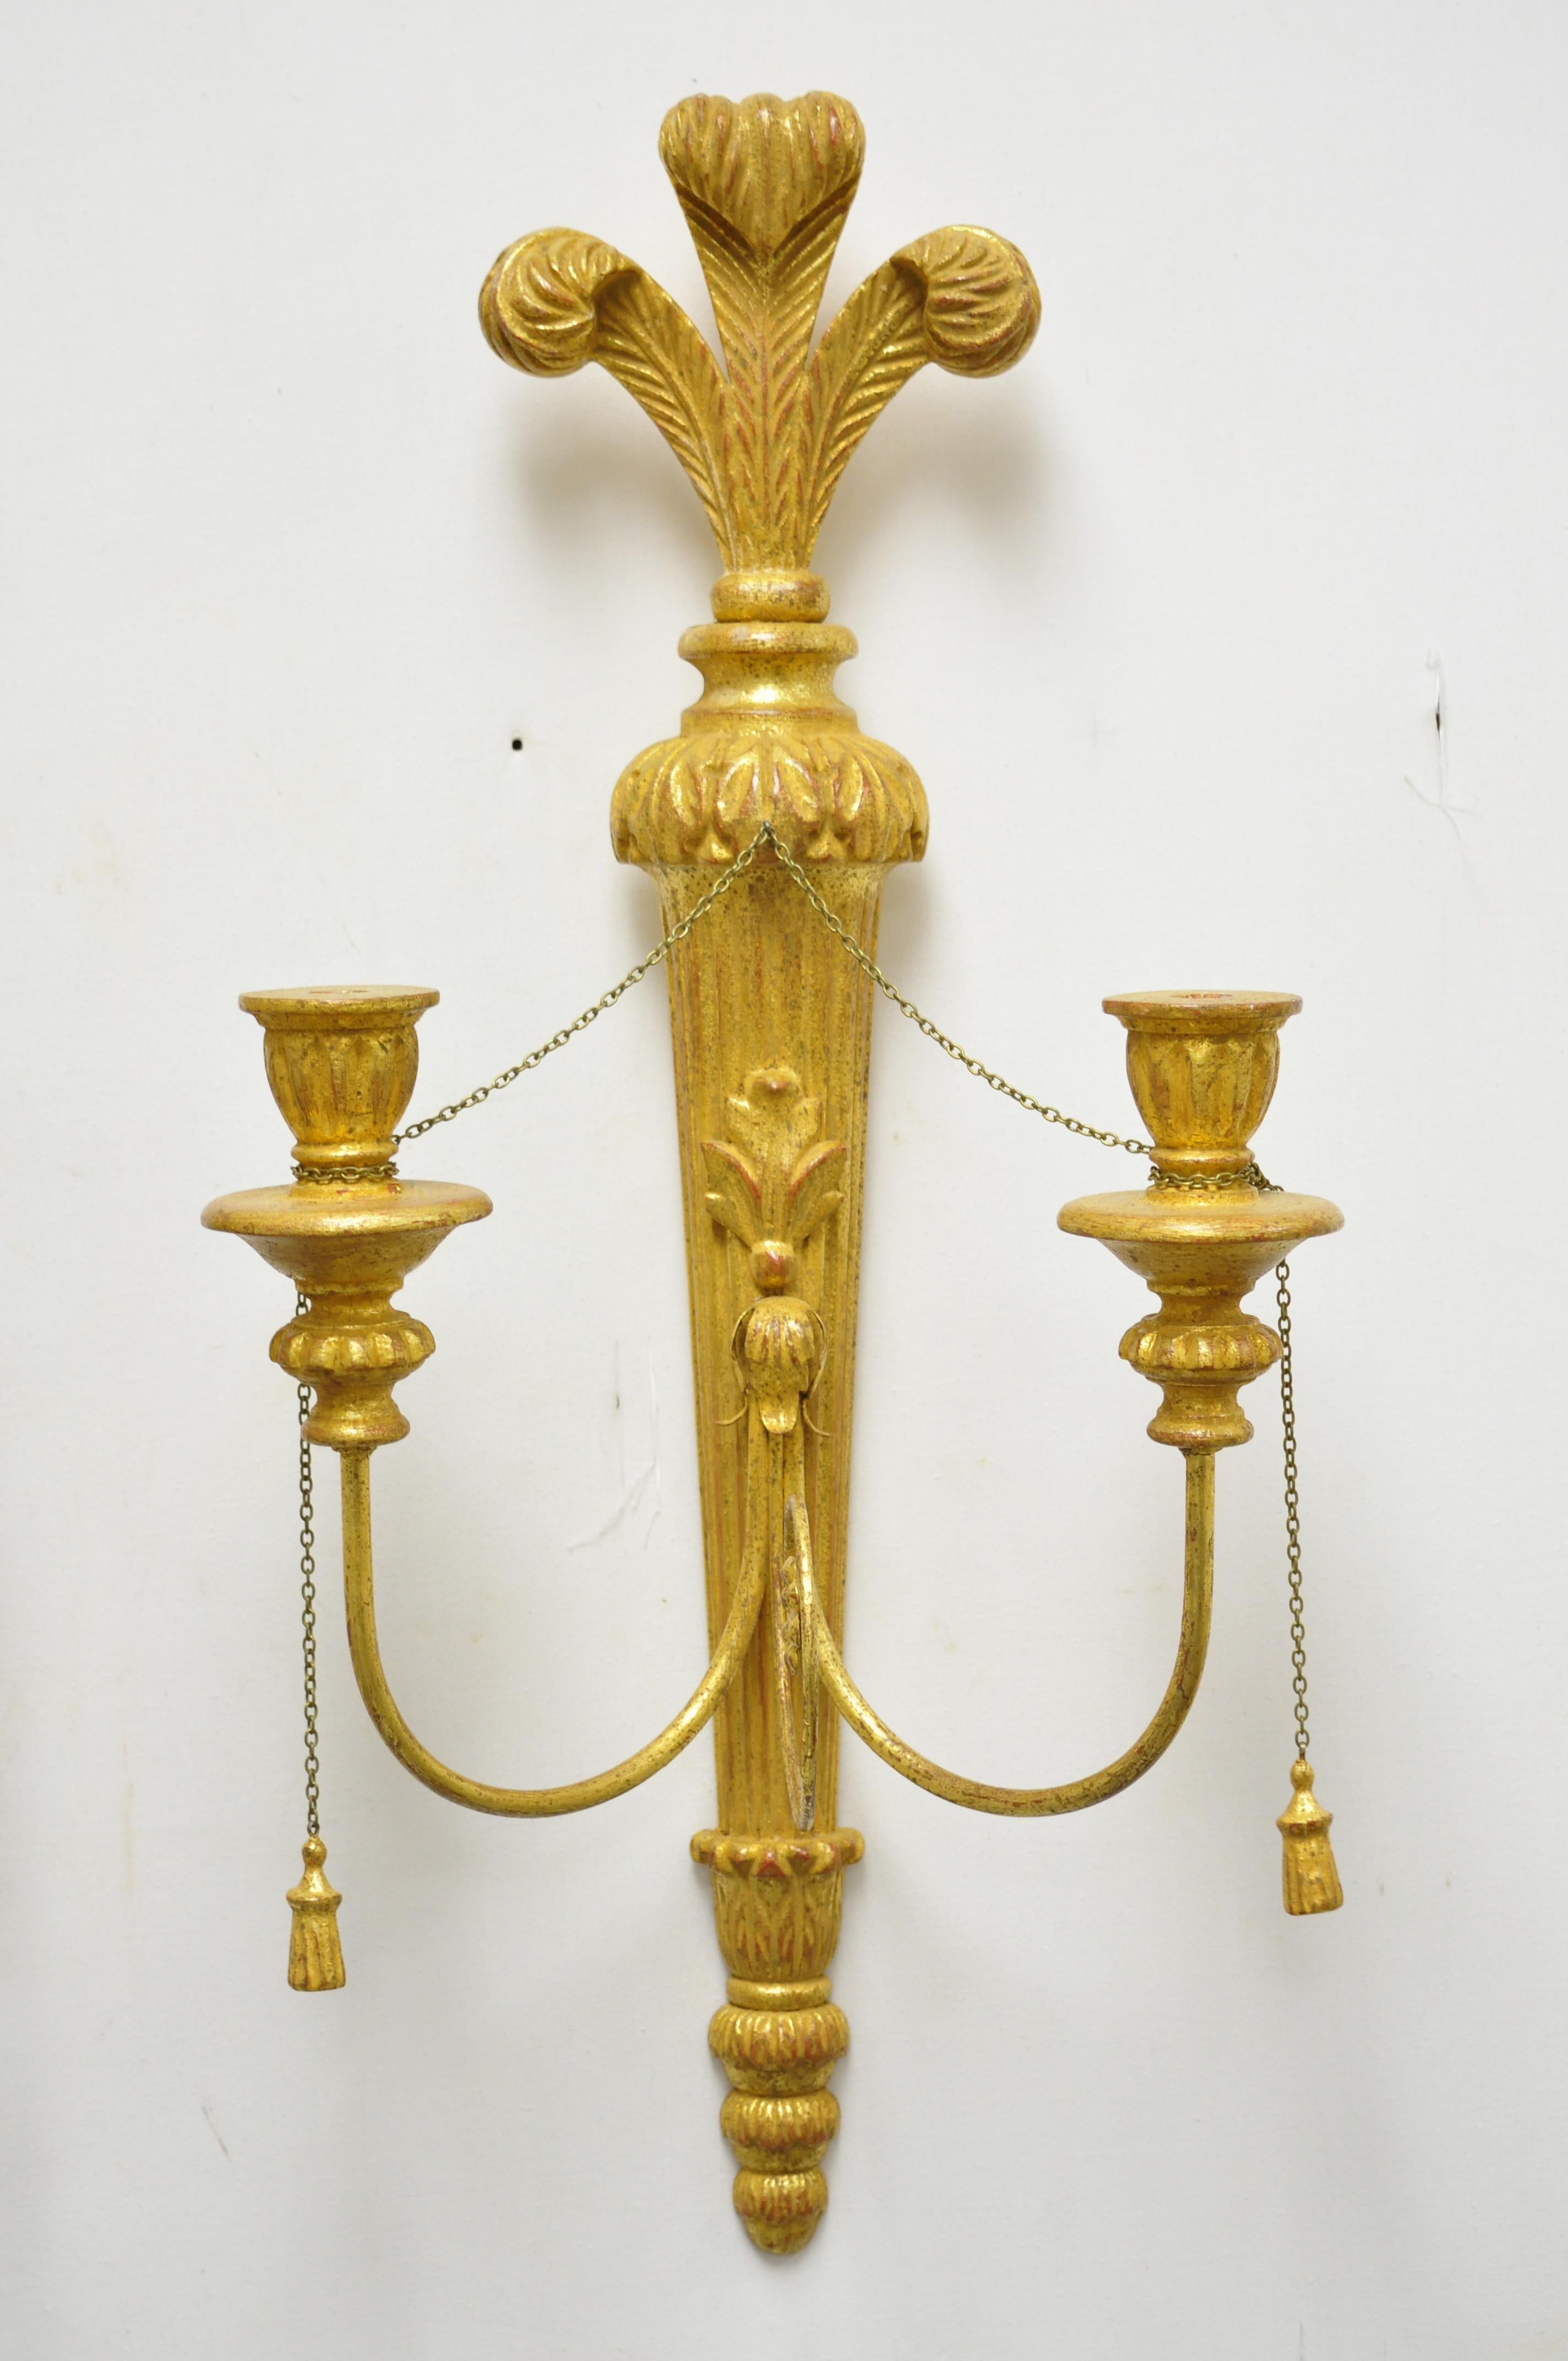 Vintage Italian Regency carved wood gold giltwood plume prince of wales sconces - a pair. Item features (2) carved wood candle holders per sconce, carved wood plume, prince of wales crest, iron scrollwork and wooden tassels. Circa mid to late 20th